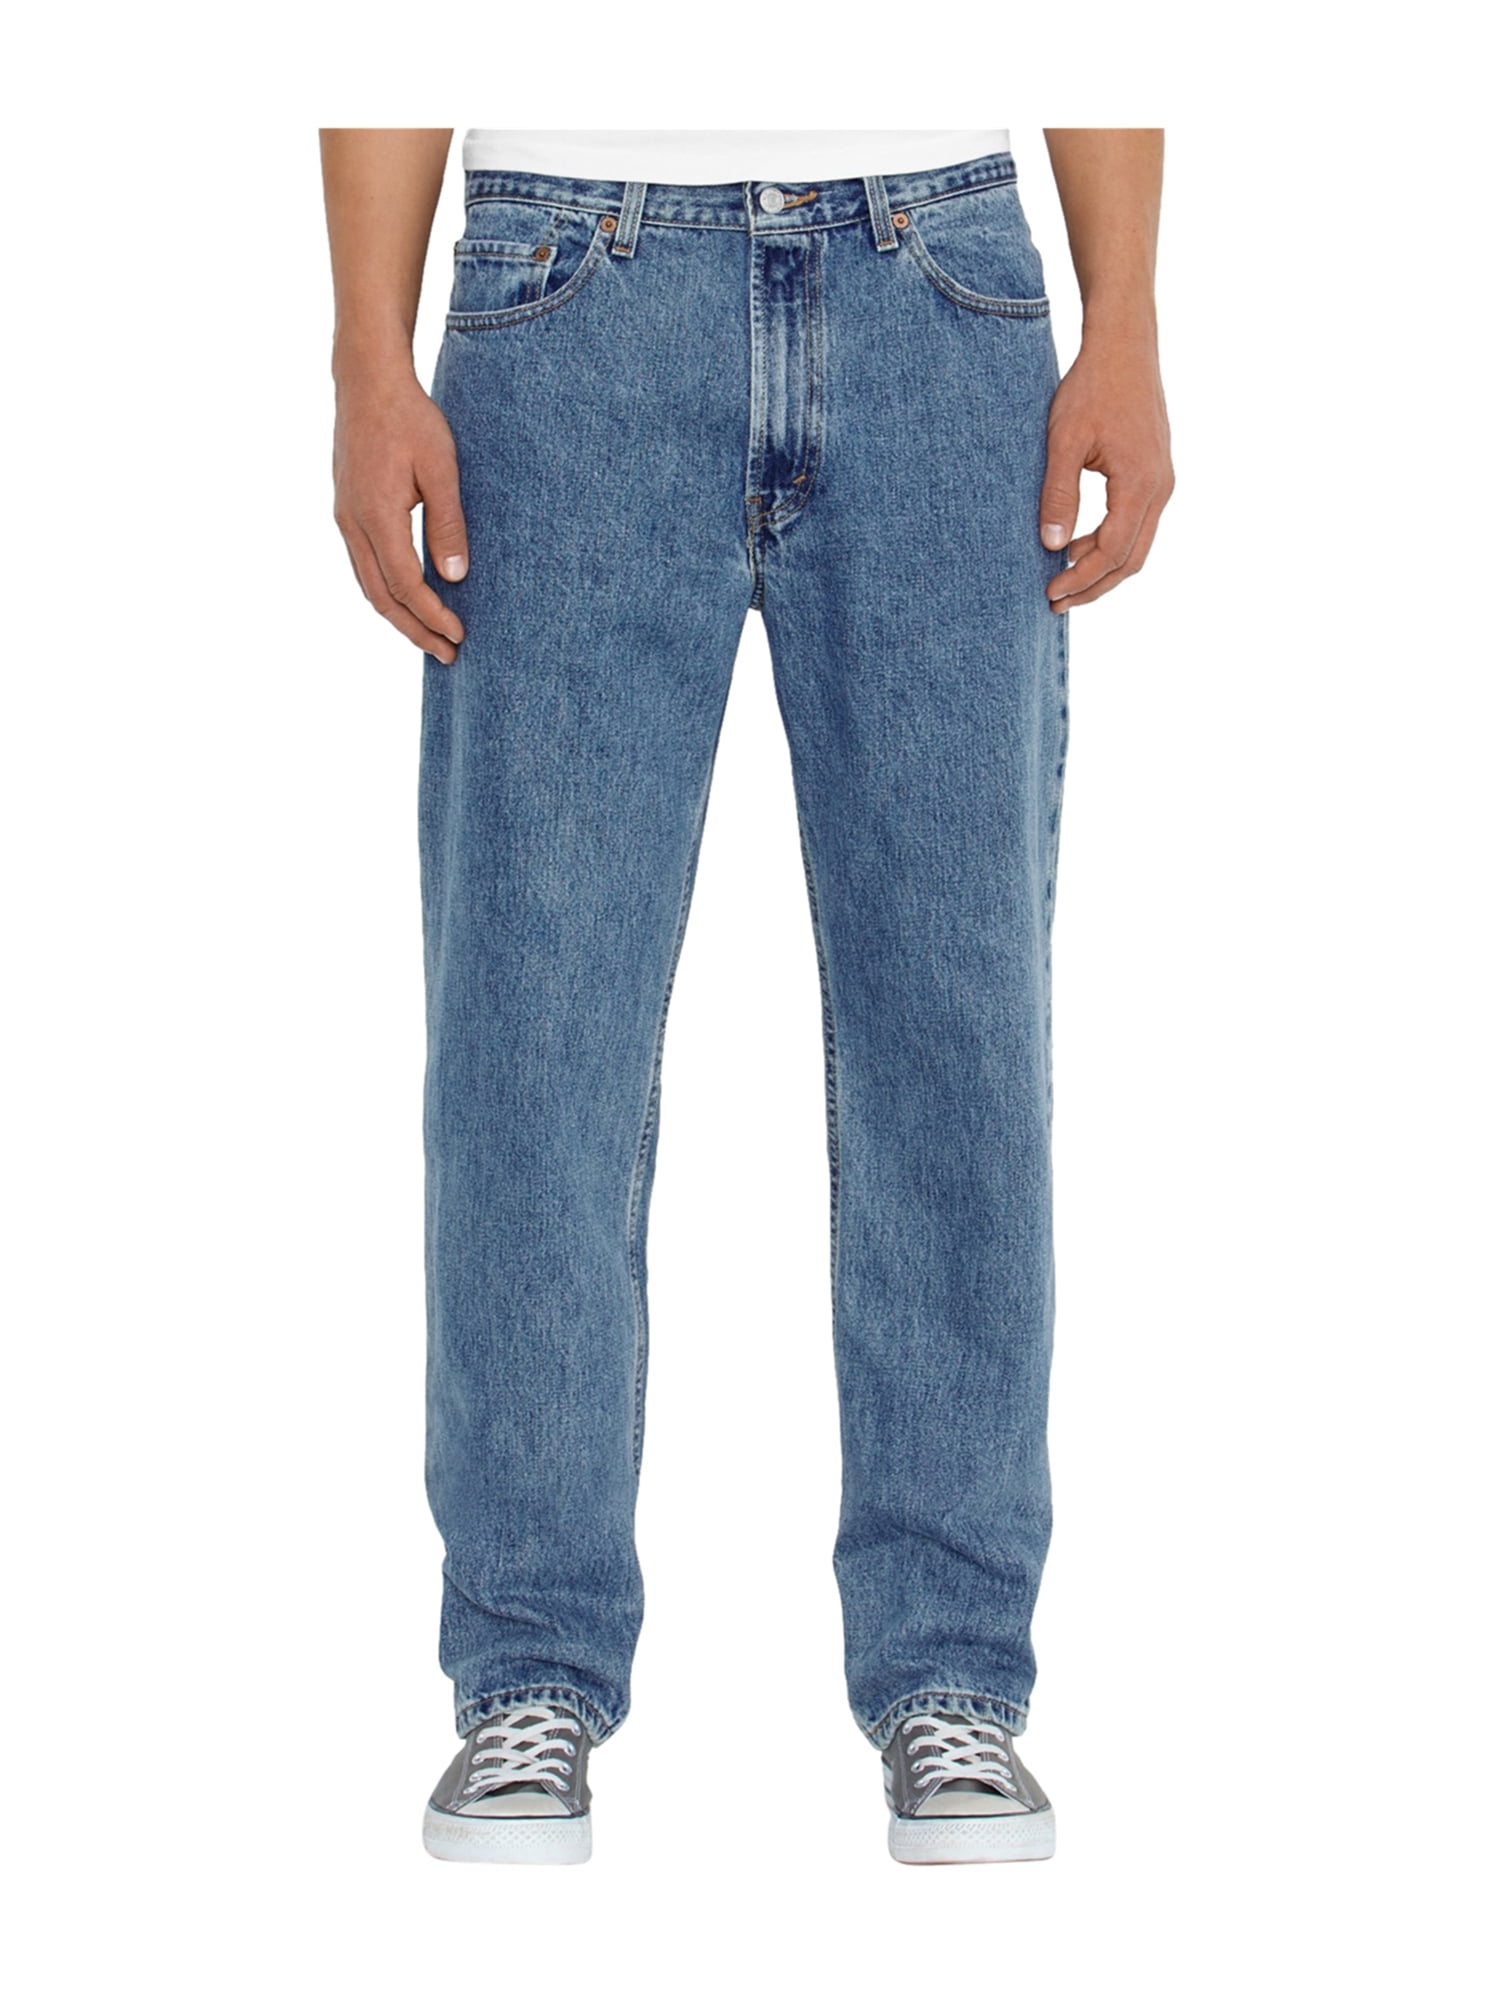 Levi's Mens 550 Relaxed Jeans blue 29x32 | Walmart Canada